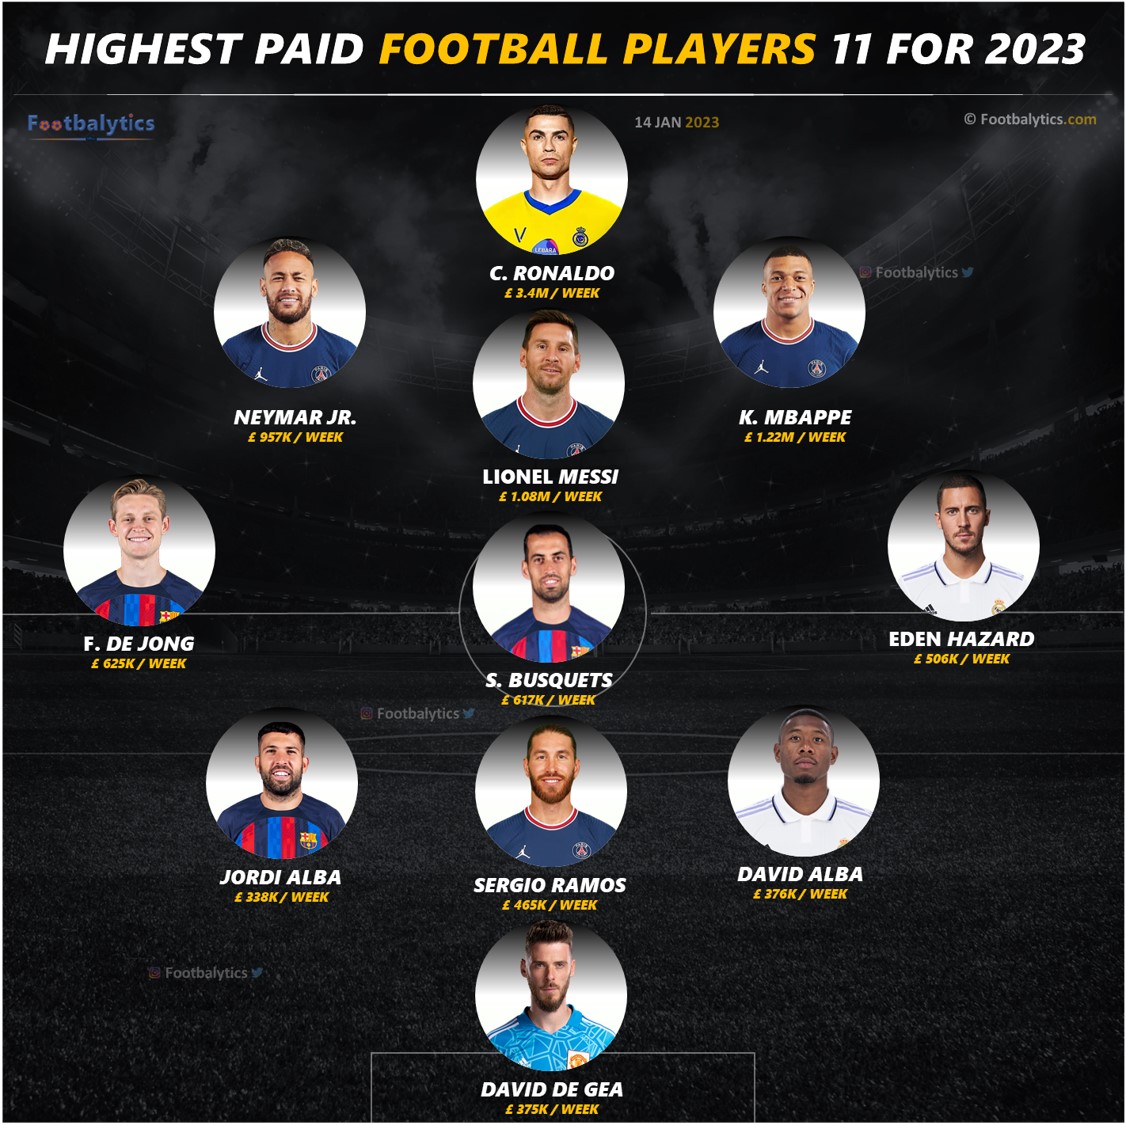 Exclusive: The Highest Paid Football Players 11 of 2023